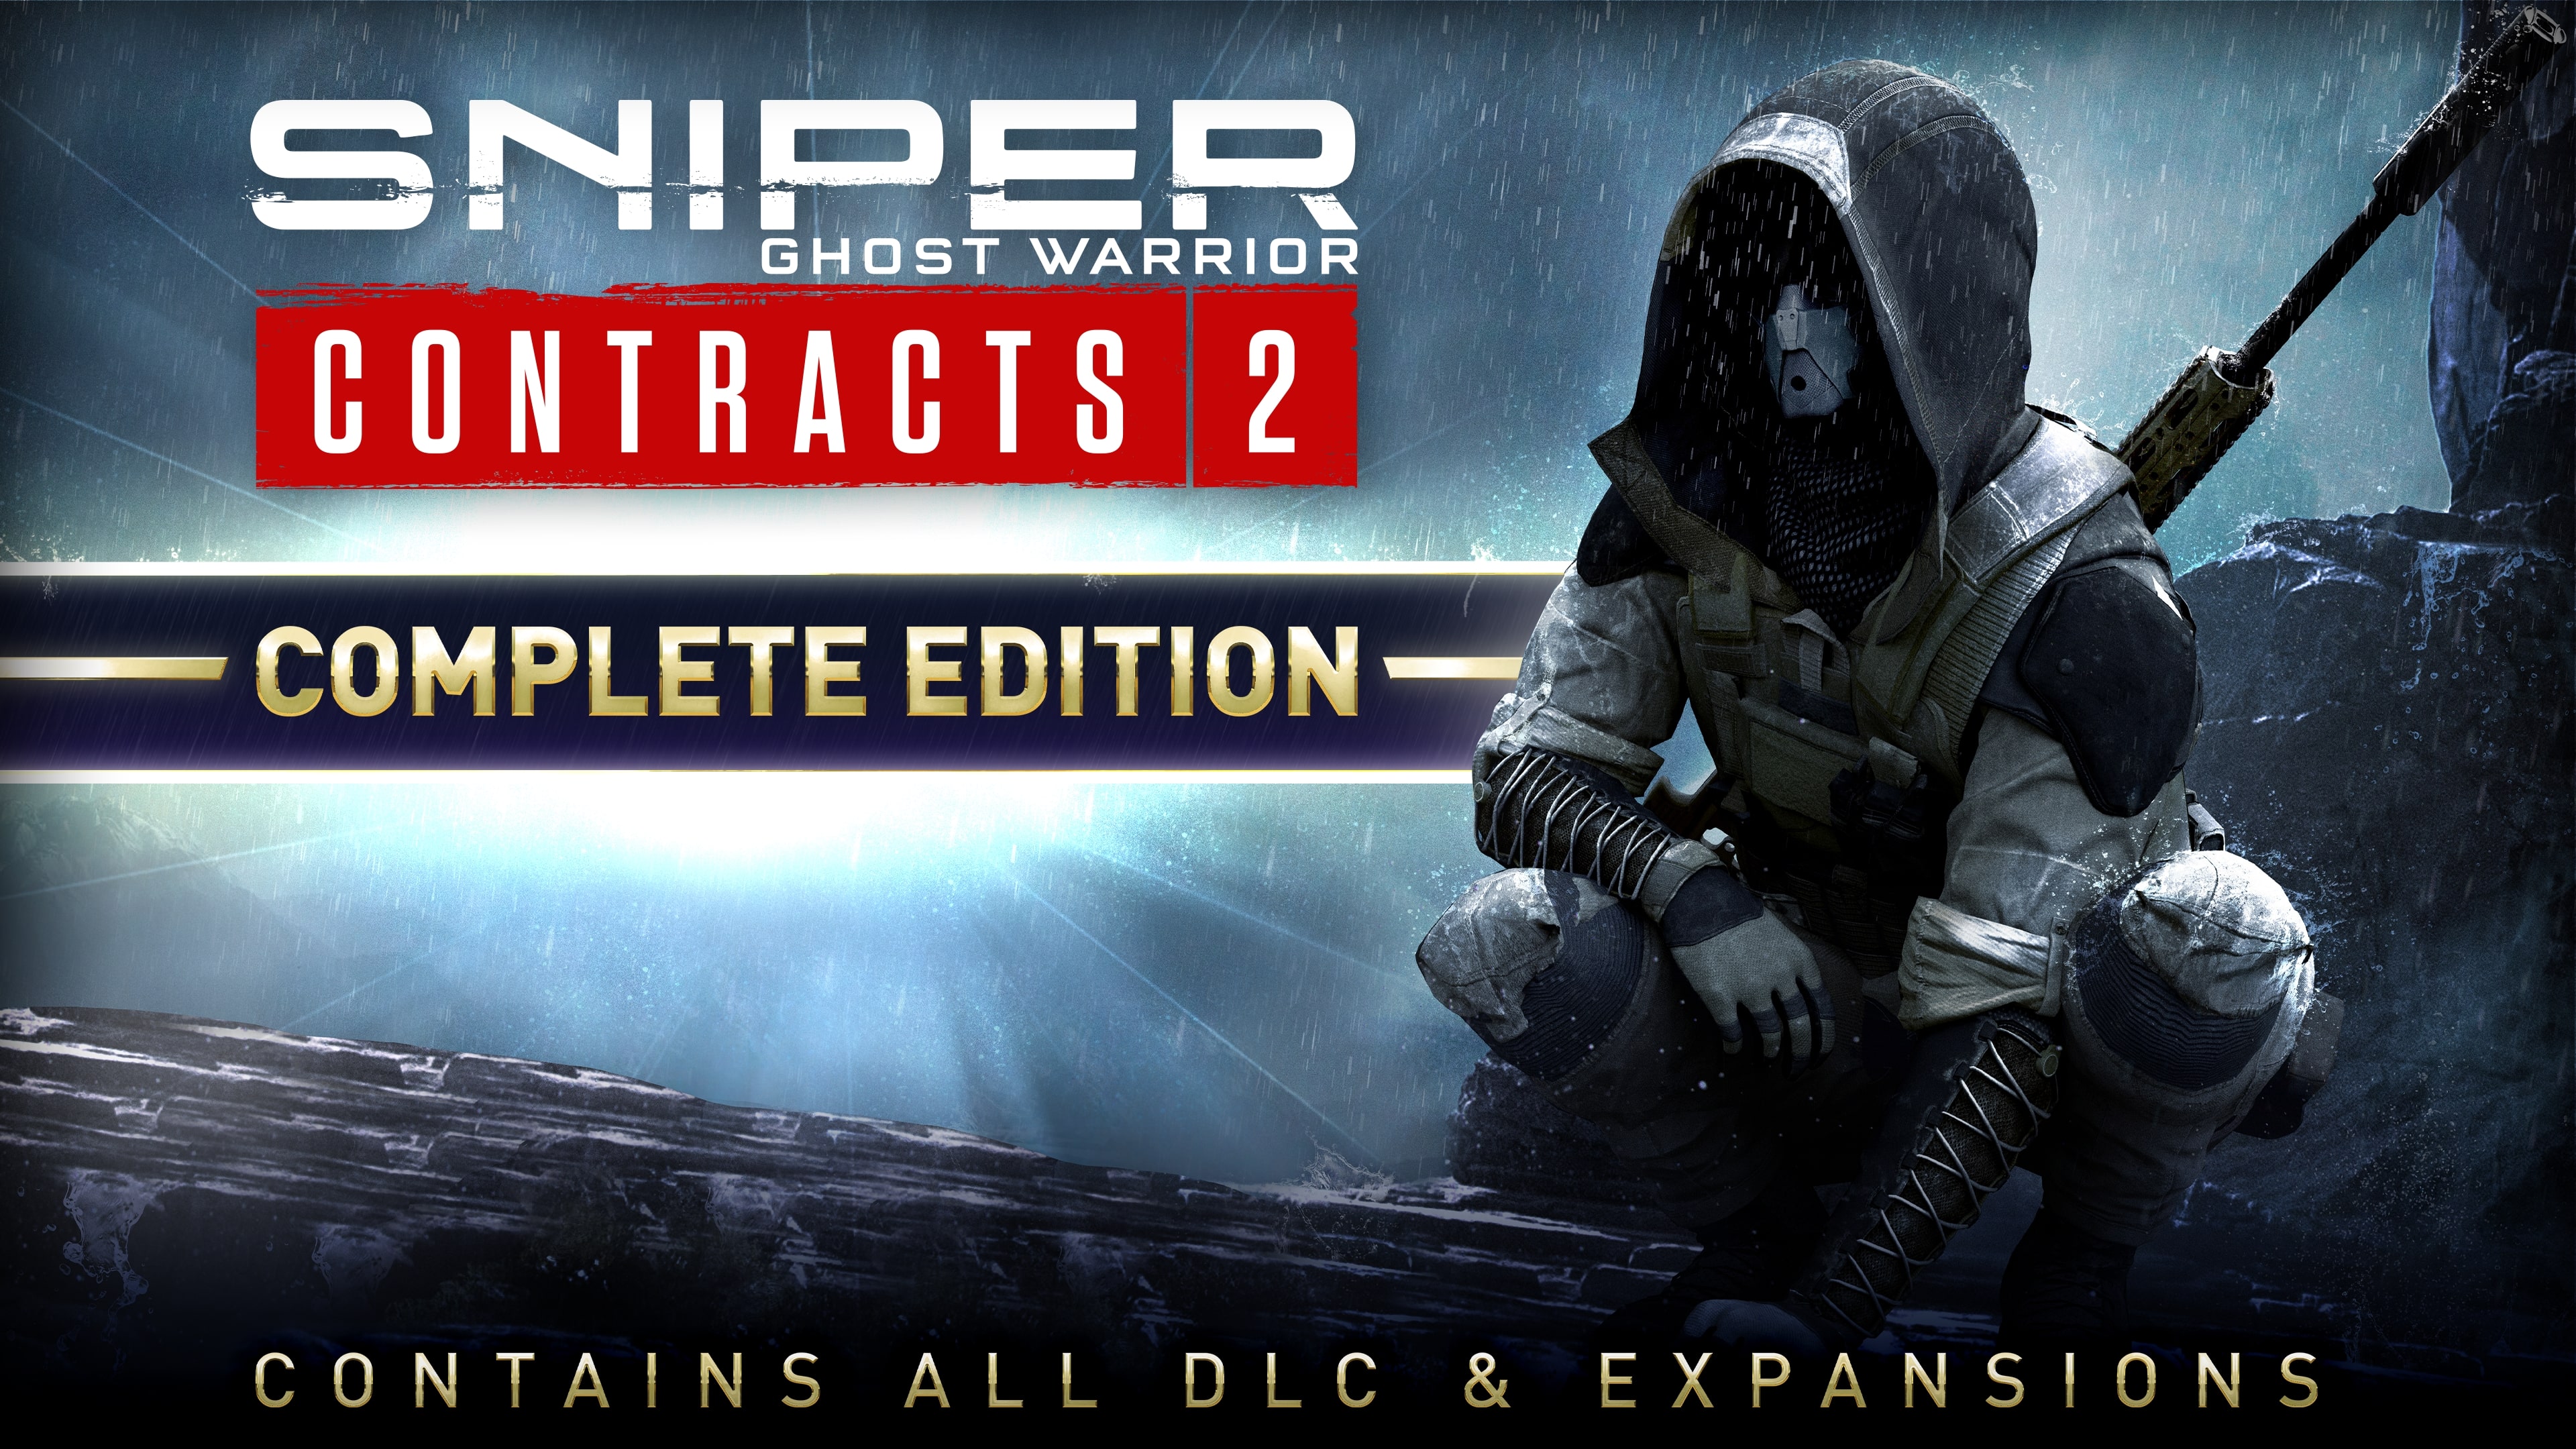 Sniper Ghost Warrior Contracts Complete Edition(スナイパーゴーストウォーリアーコントラクト２ コンプリートエディション)